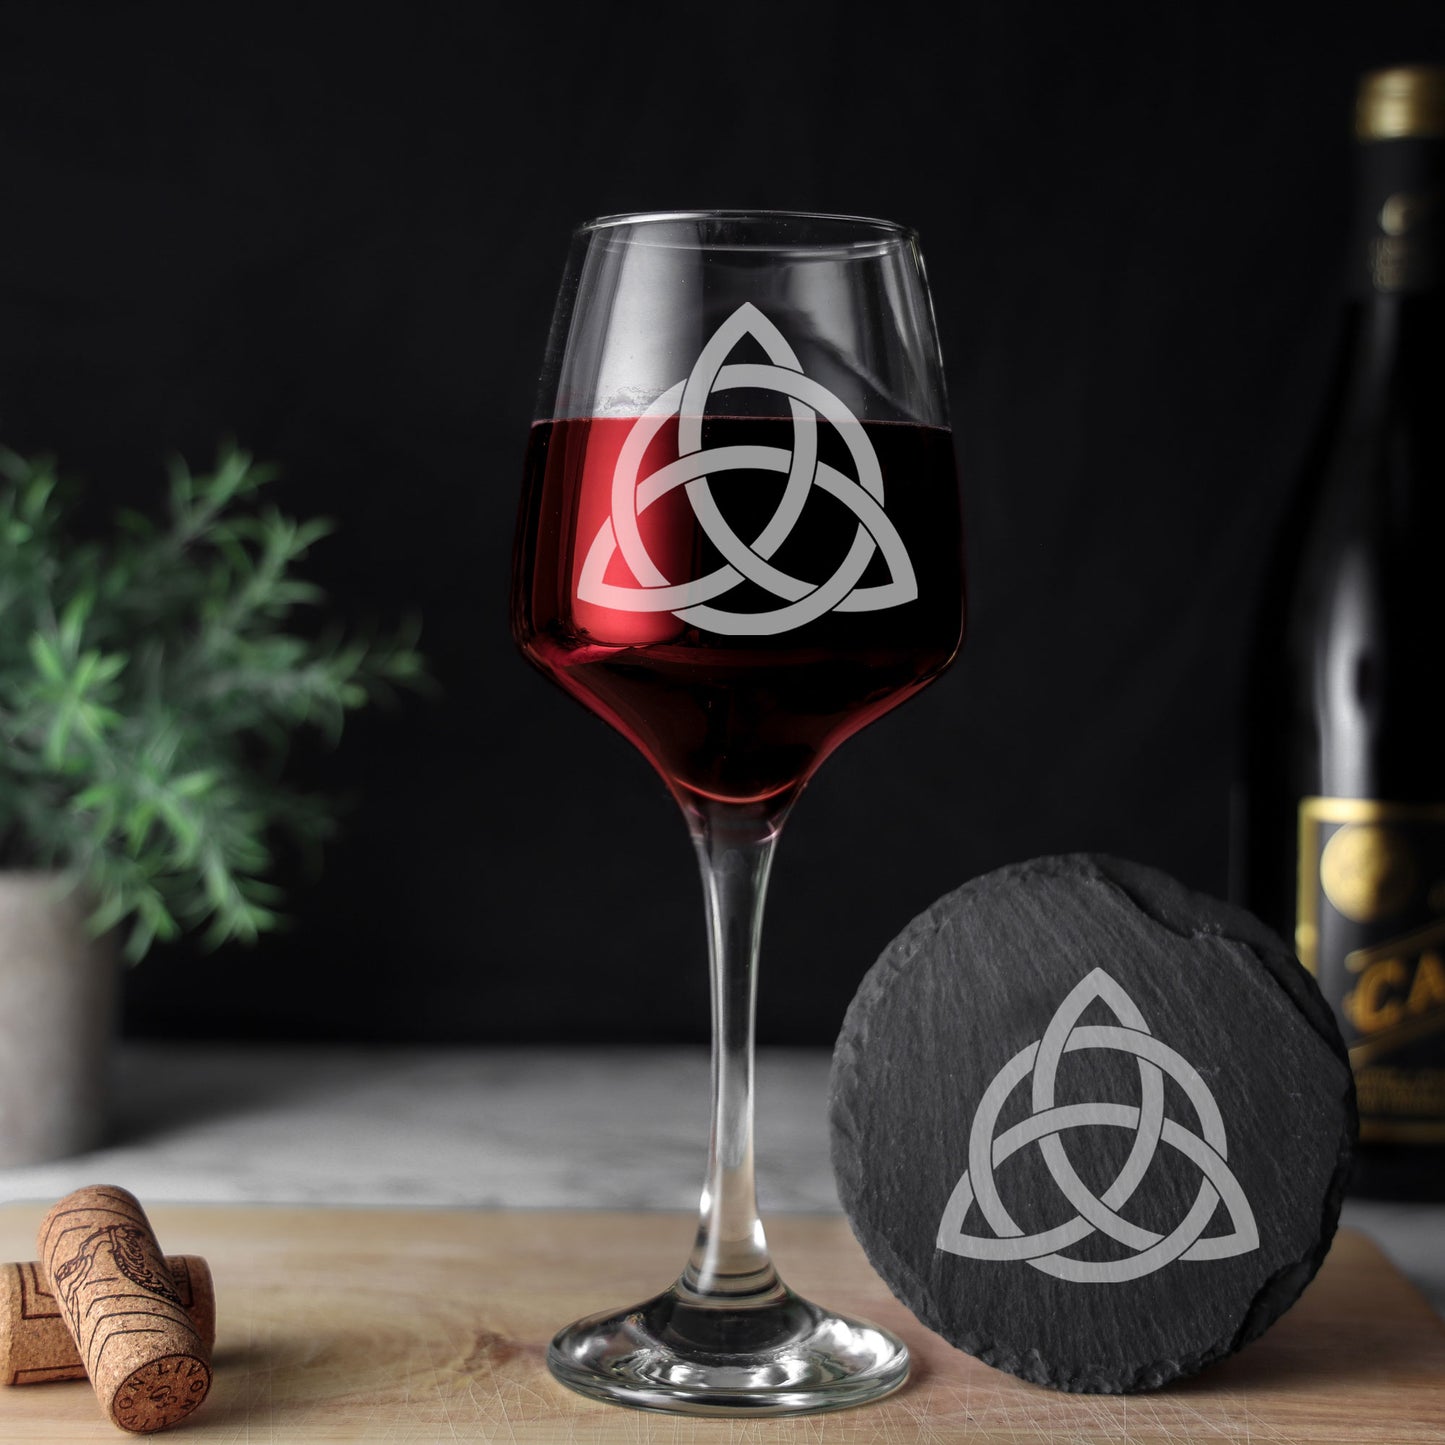 Celtic Knot Irish Engraved Wine Glass and/or Coaster Set  - Always Looking Good - Glass & Round Coaster Set  